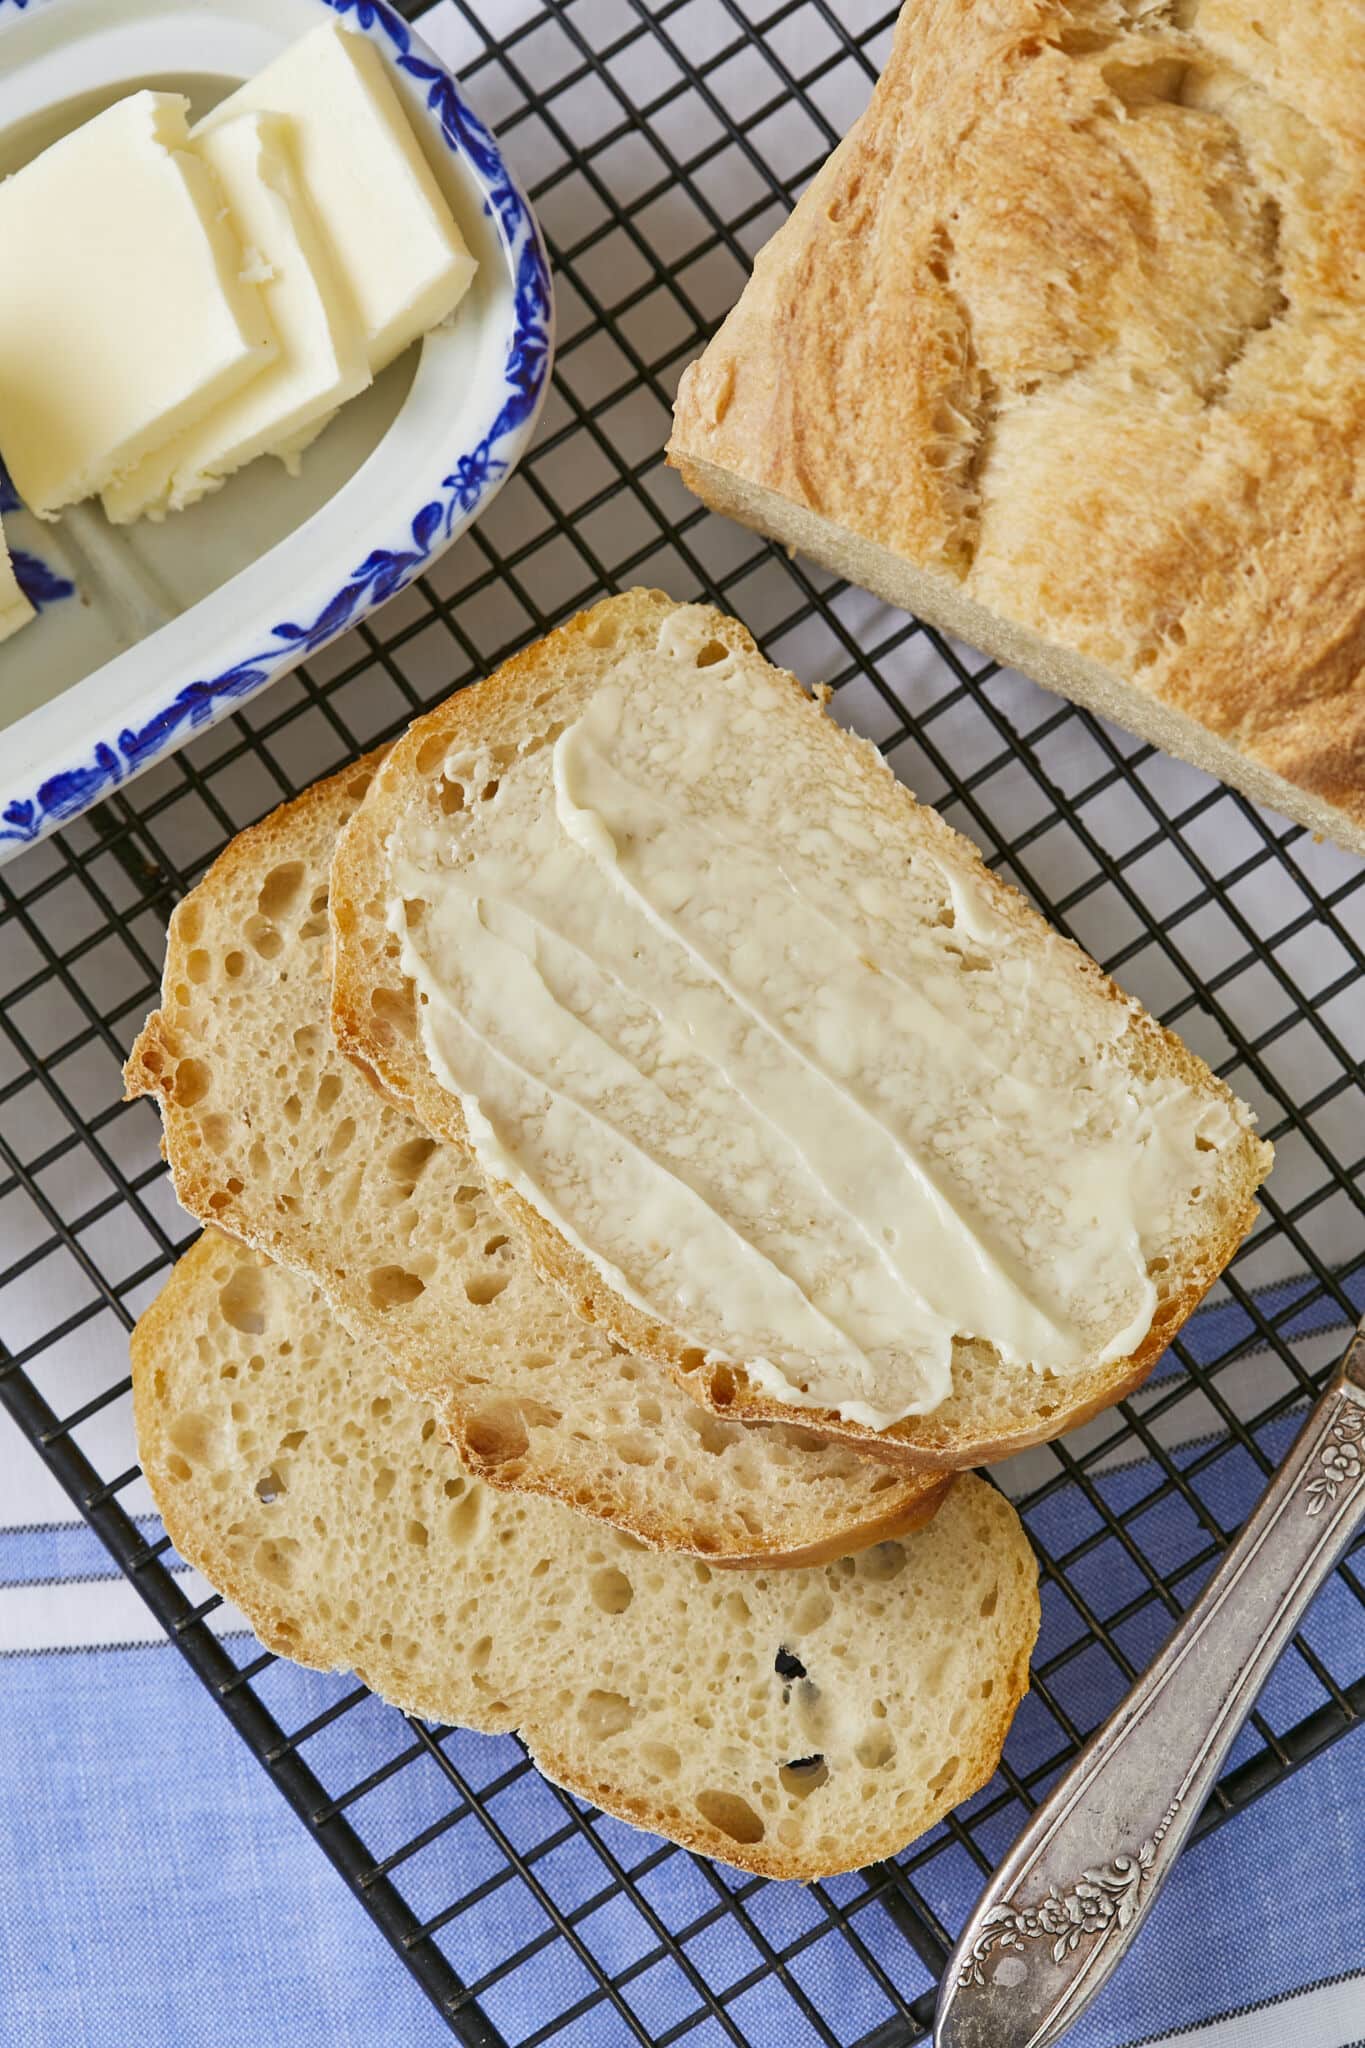 Butter is to the left of half golden sandwich loaf. Three slices are cut out and one slice has softened butter spread on top. 